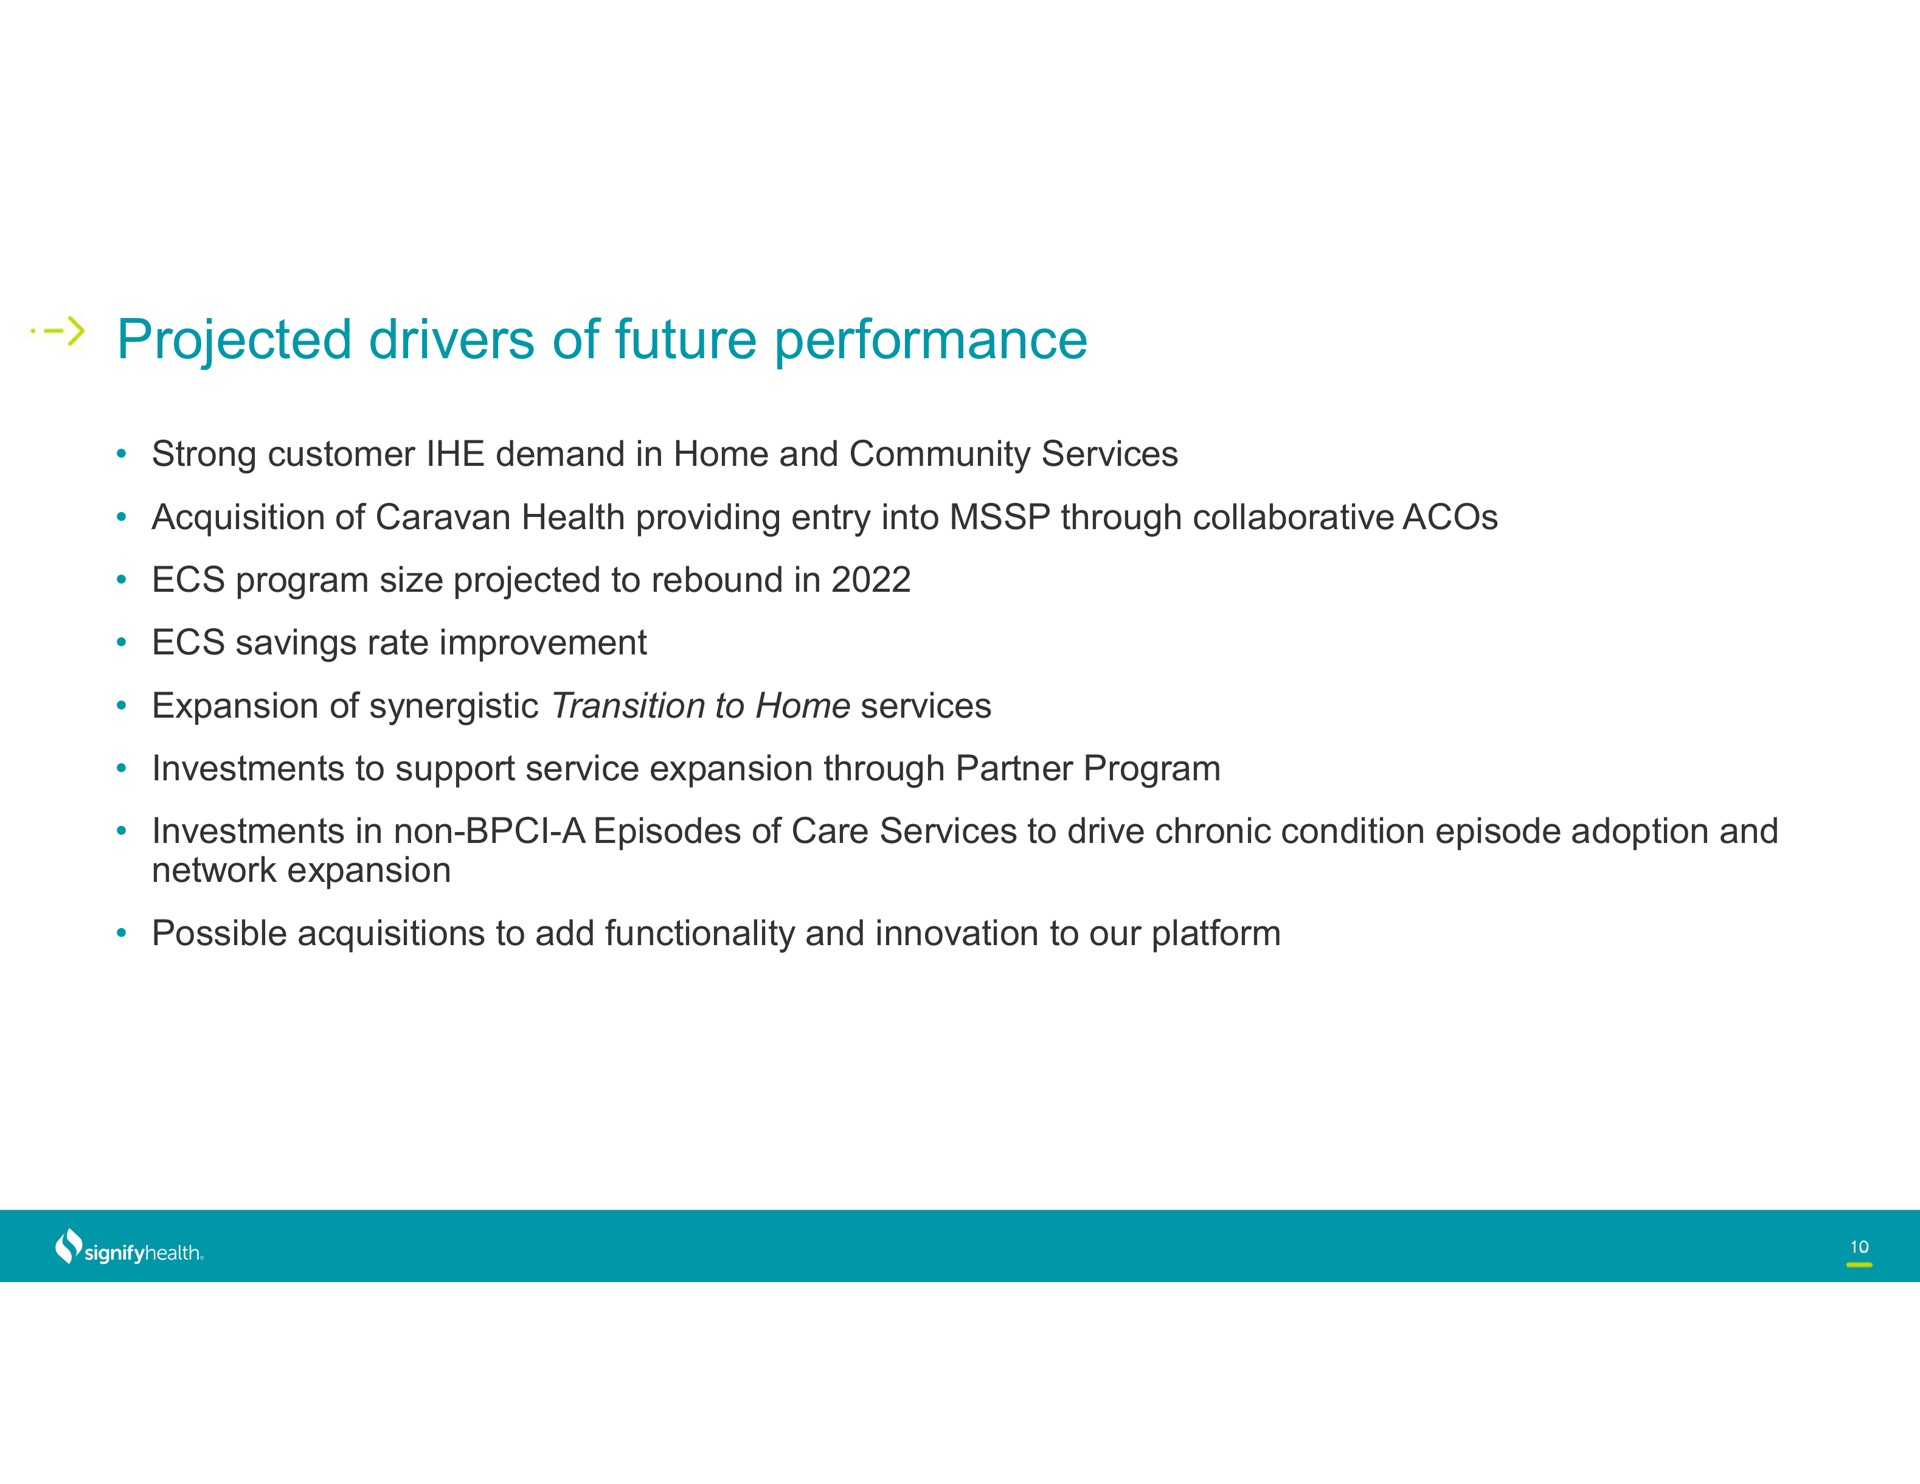 projected drivers of future performance | Signify Health